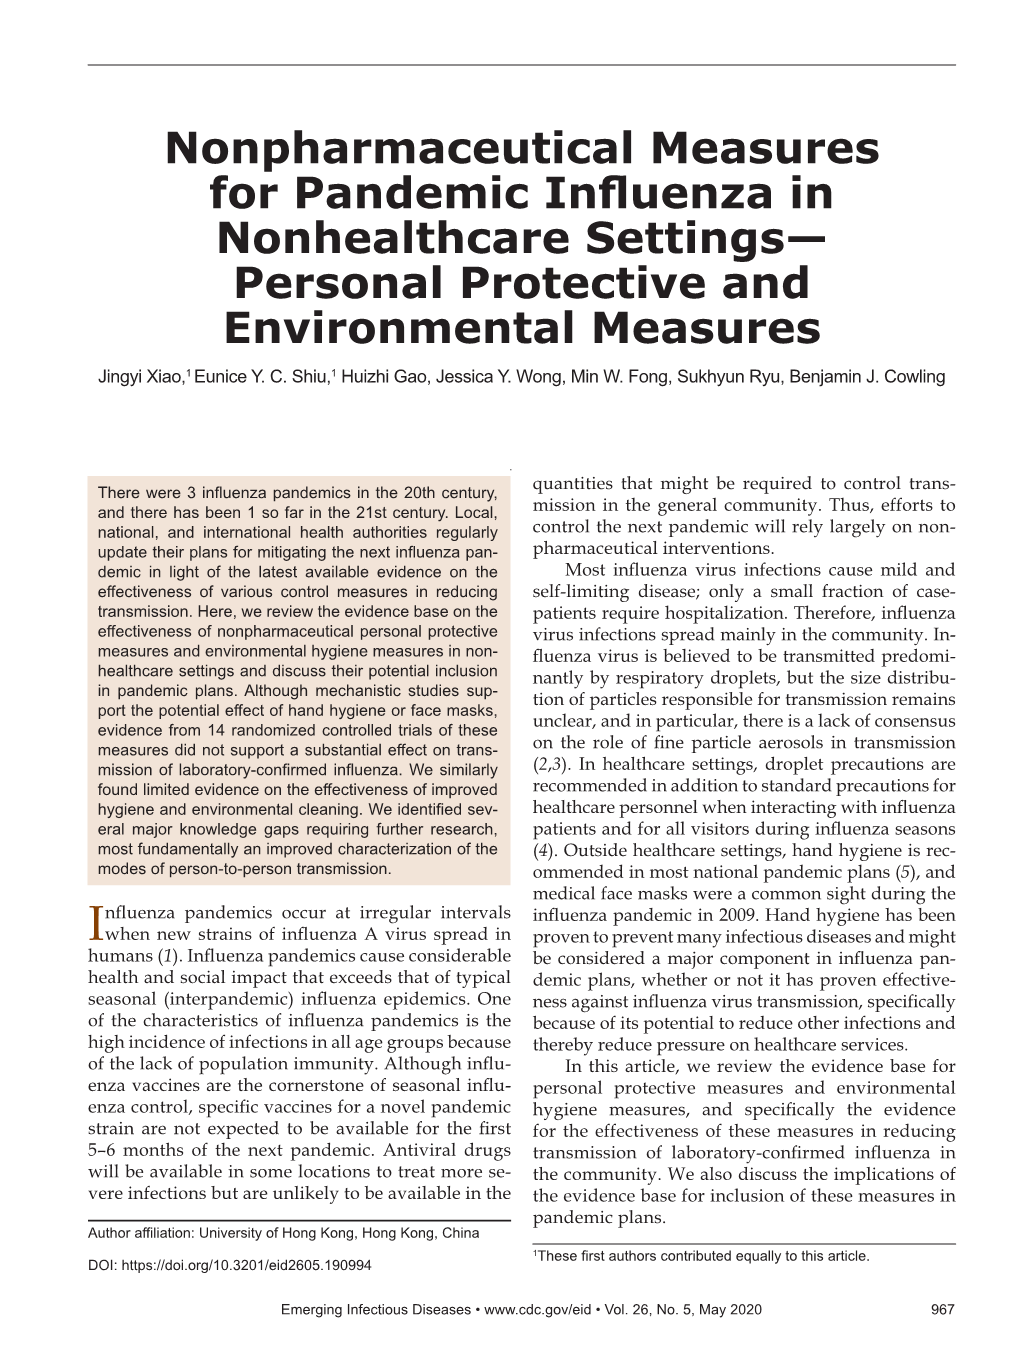 Nonpharmaceutical Measures for Pandemic Influenza in Nonhealthcare Settings— Personal Protective and Environmental Measures Jingyi Xiao,1 Eunice Y